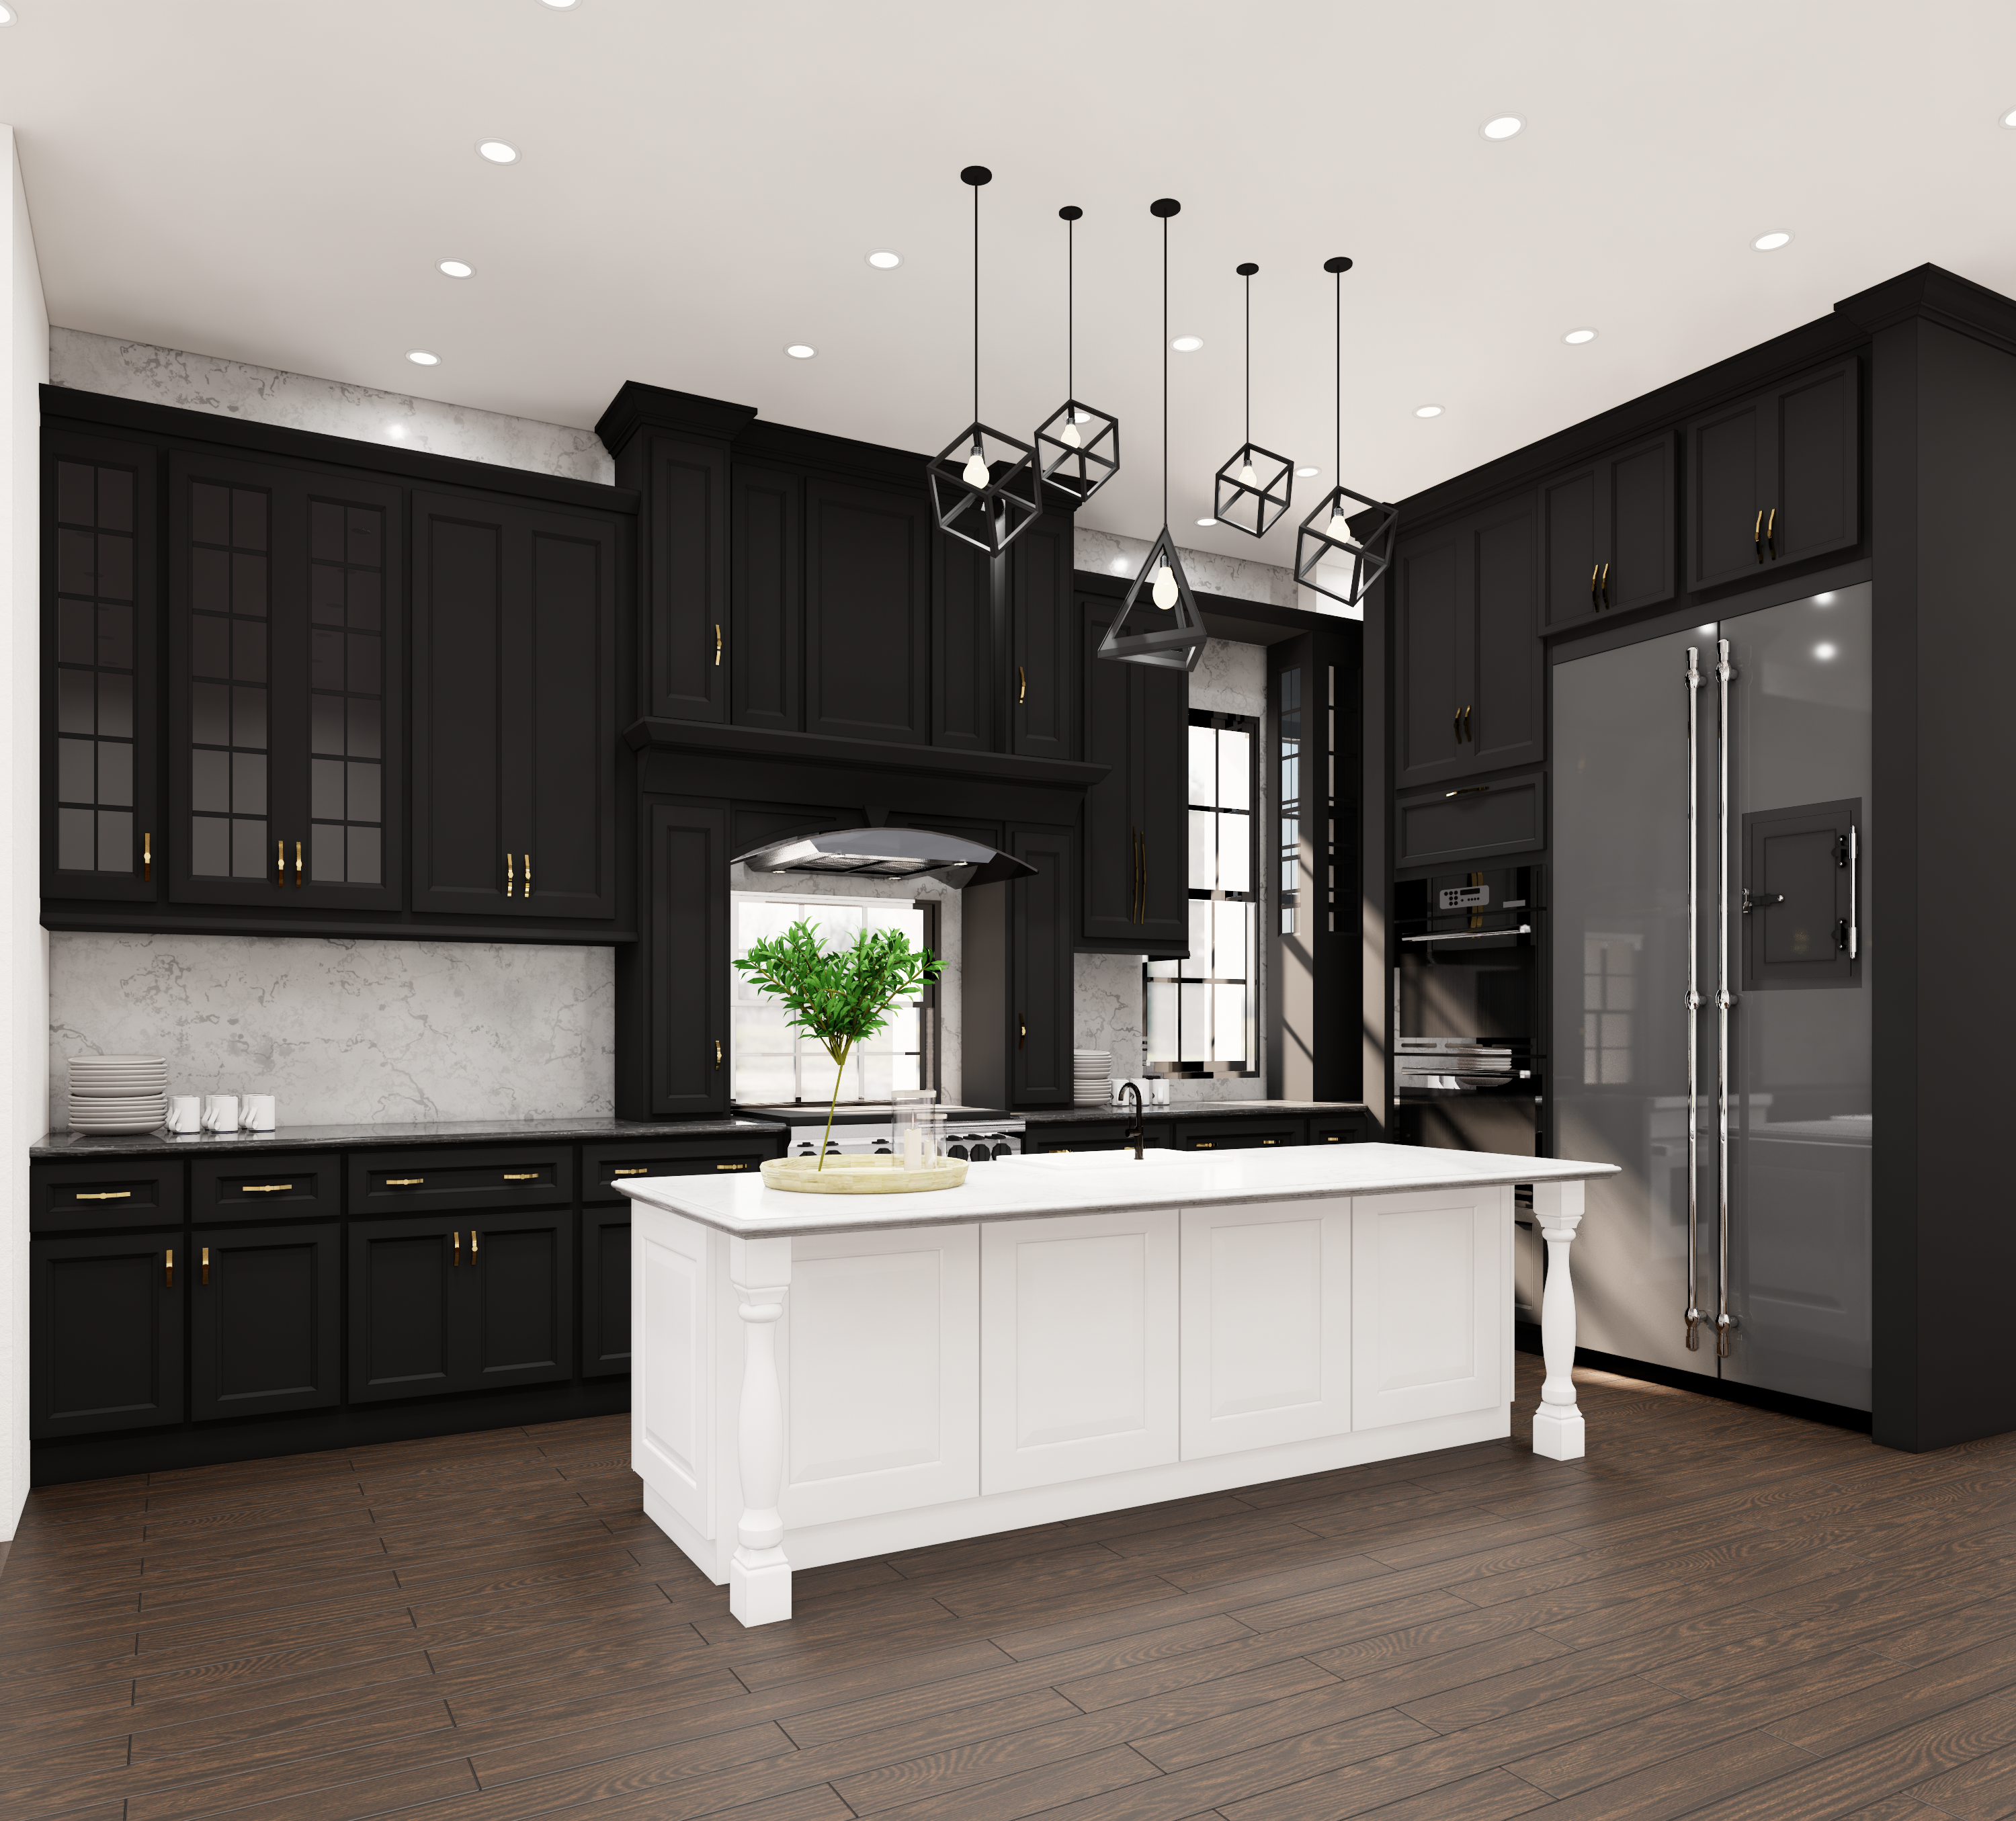 29614I will kitchen 3d model visualization renders 2d drawings